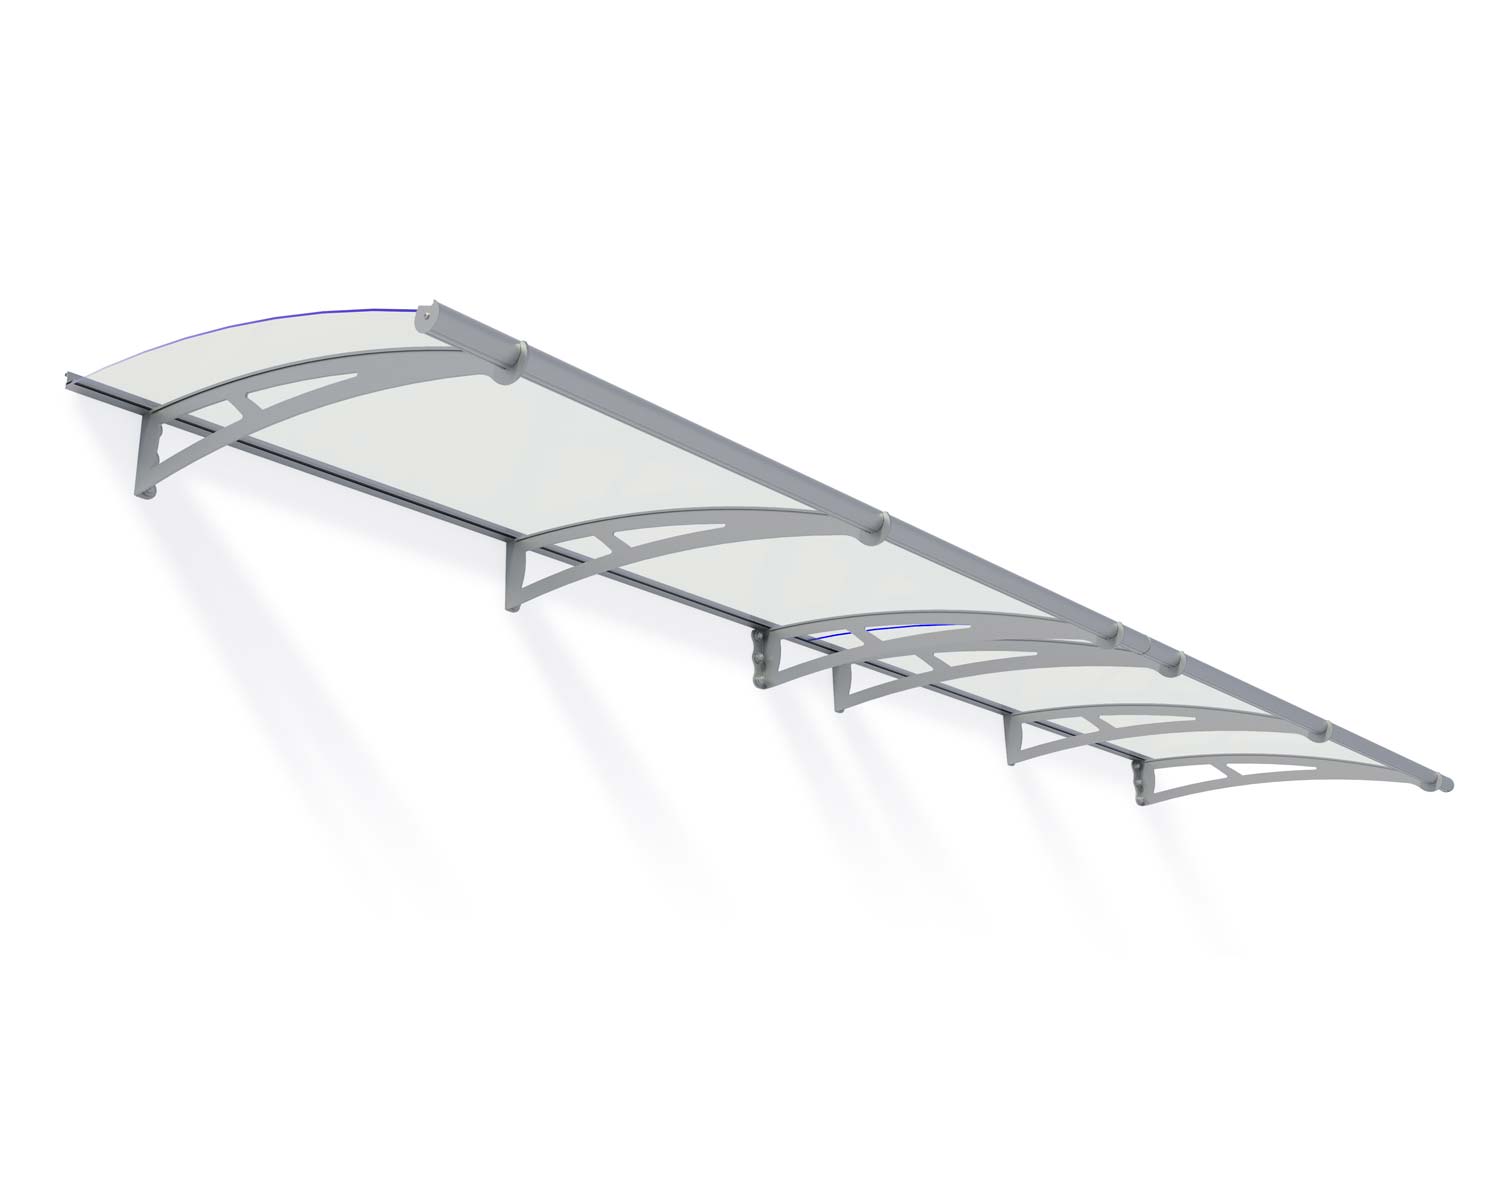 Door Awning Capella 3 ft. x 14 ft Silver Structure & Clear Glazing